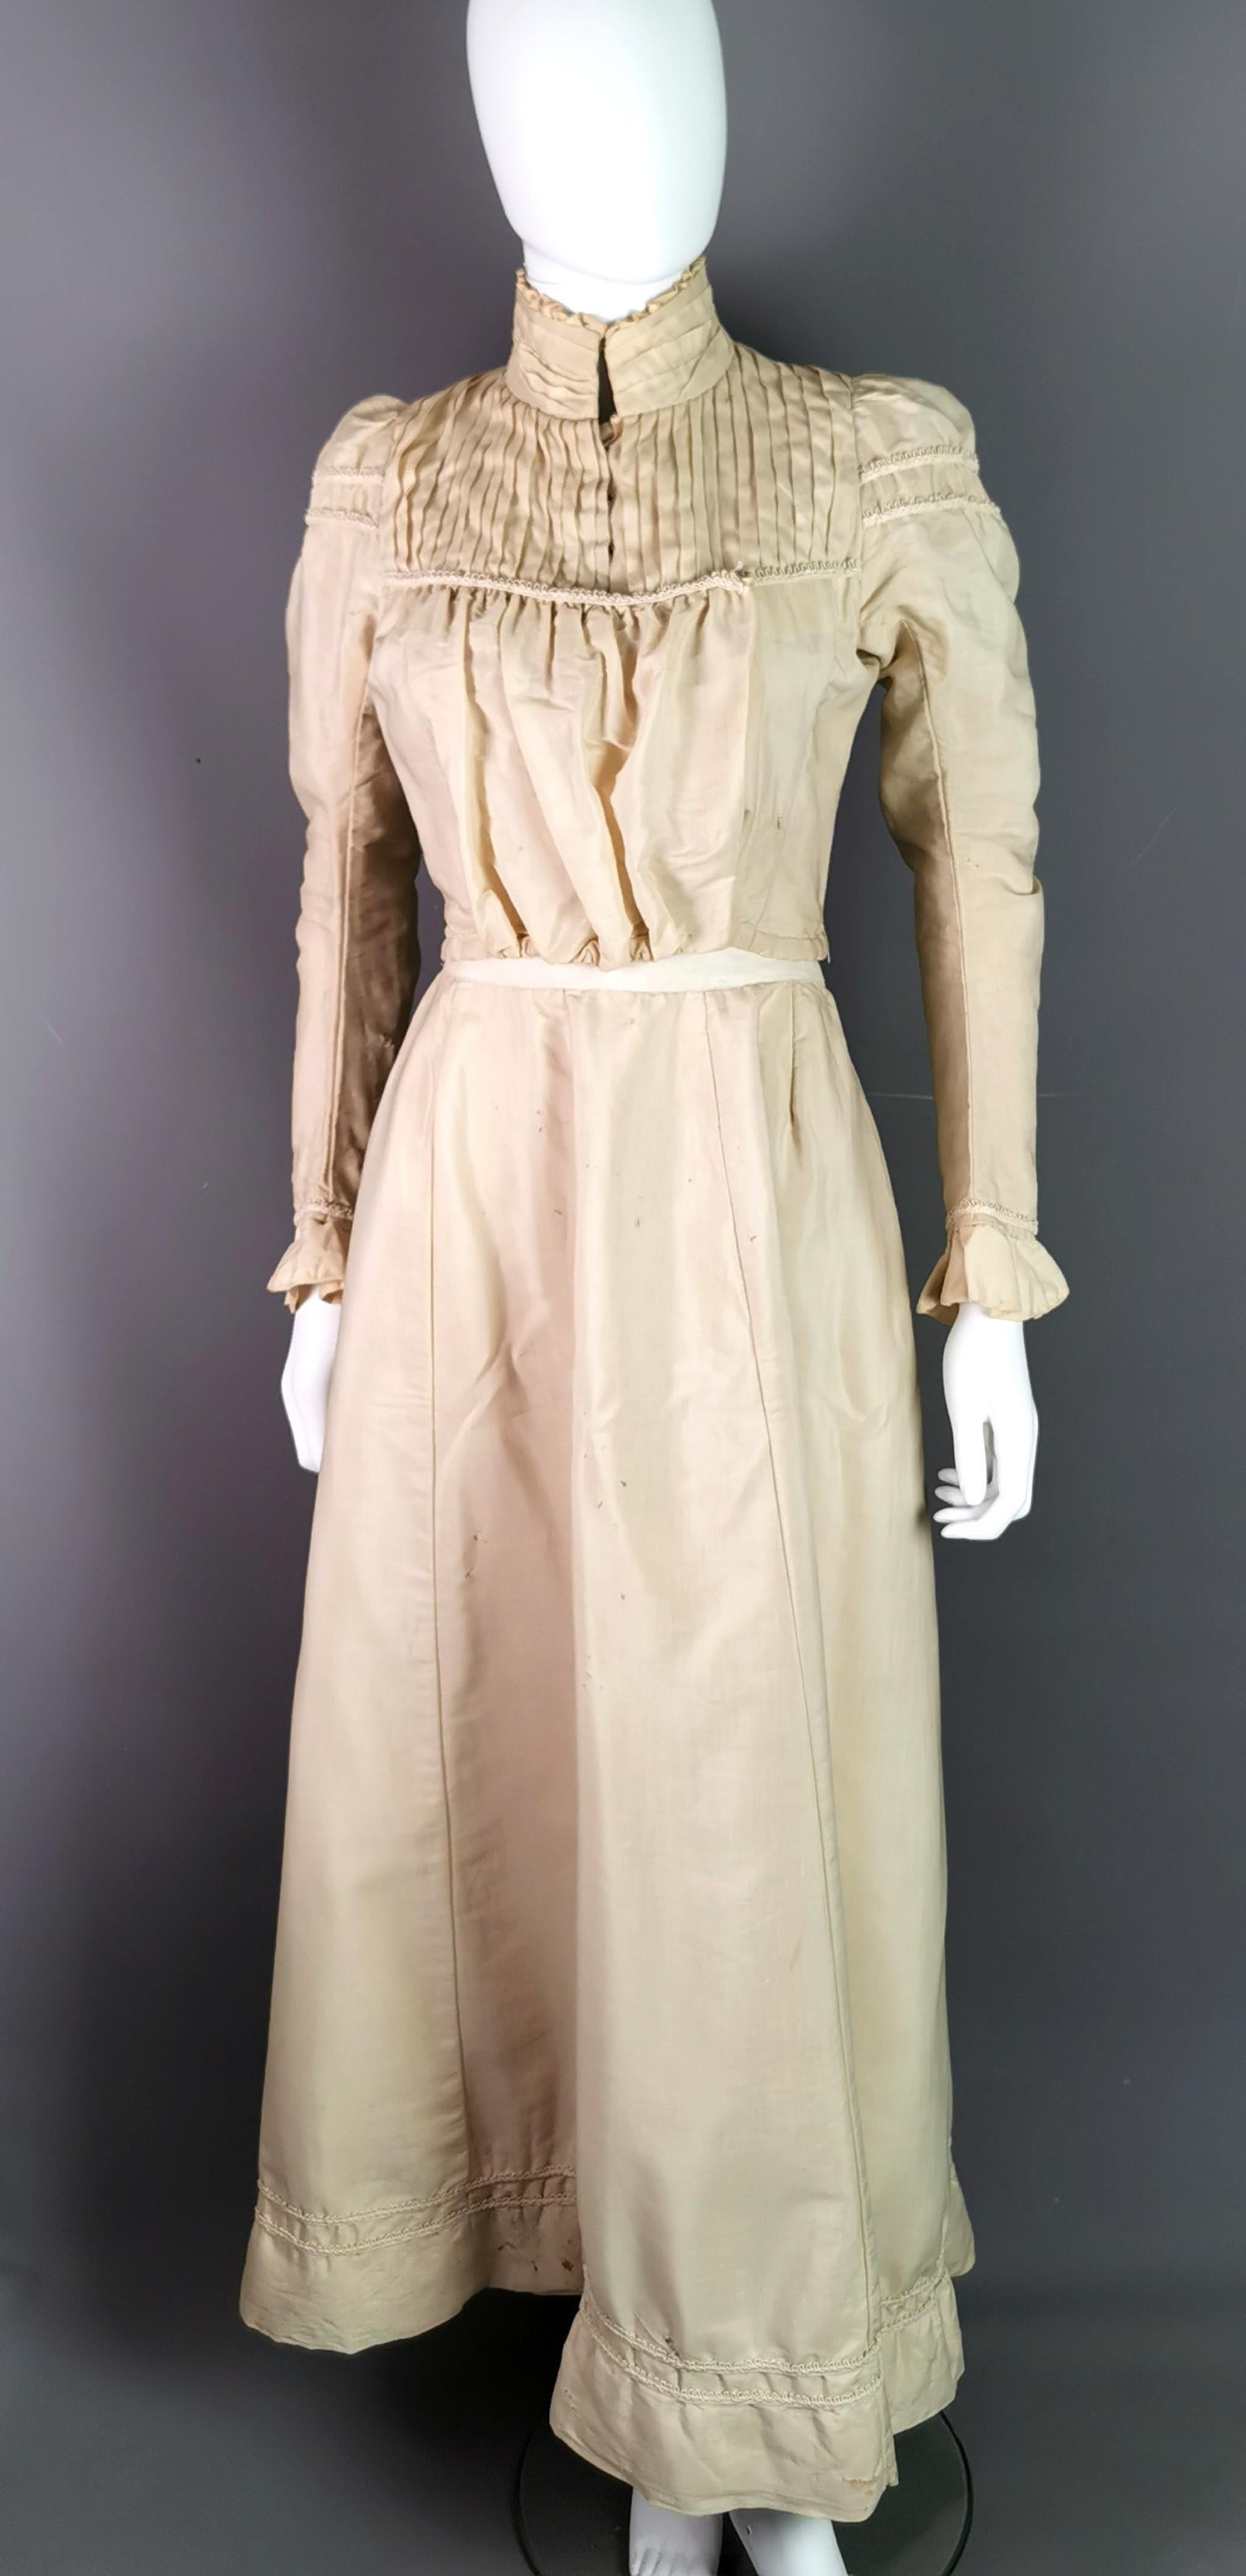 A rare antique early Edwardian day dress.

A two piece dress comprising of a pigeon chest Pouter bodice or blouse with long sleeves and flared cuffs, the bodice fastens across with hook and eye fasteners, it has a high neck with a ruffled collar and